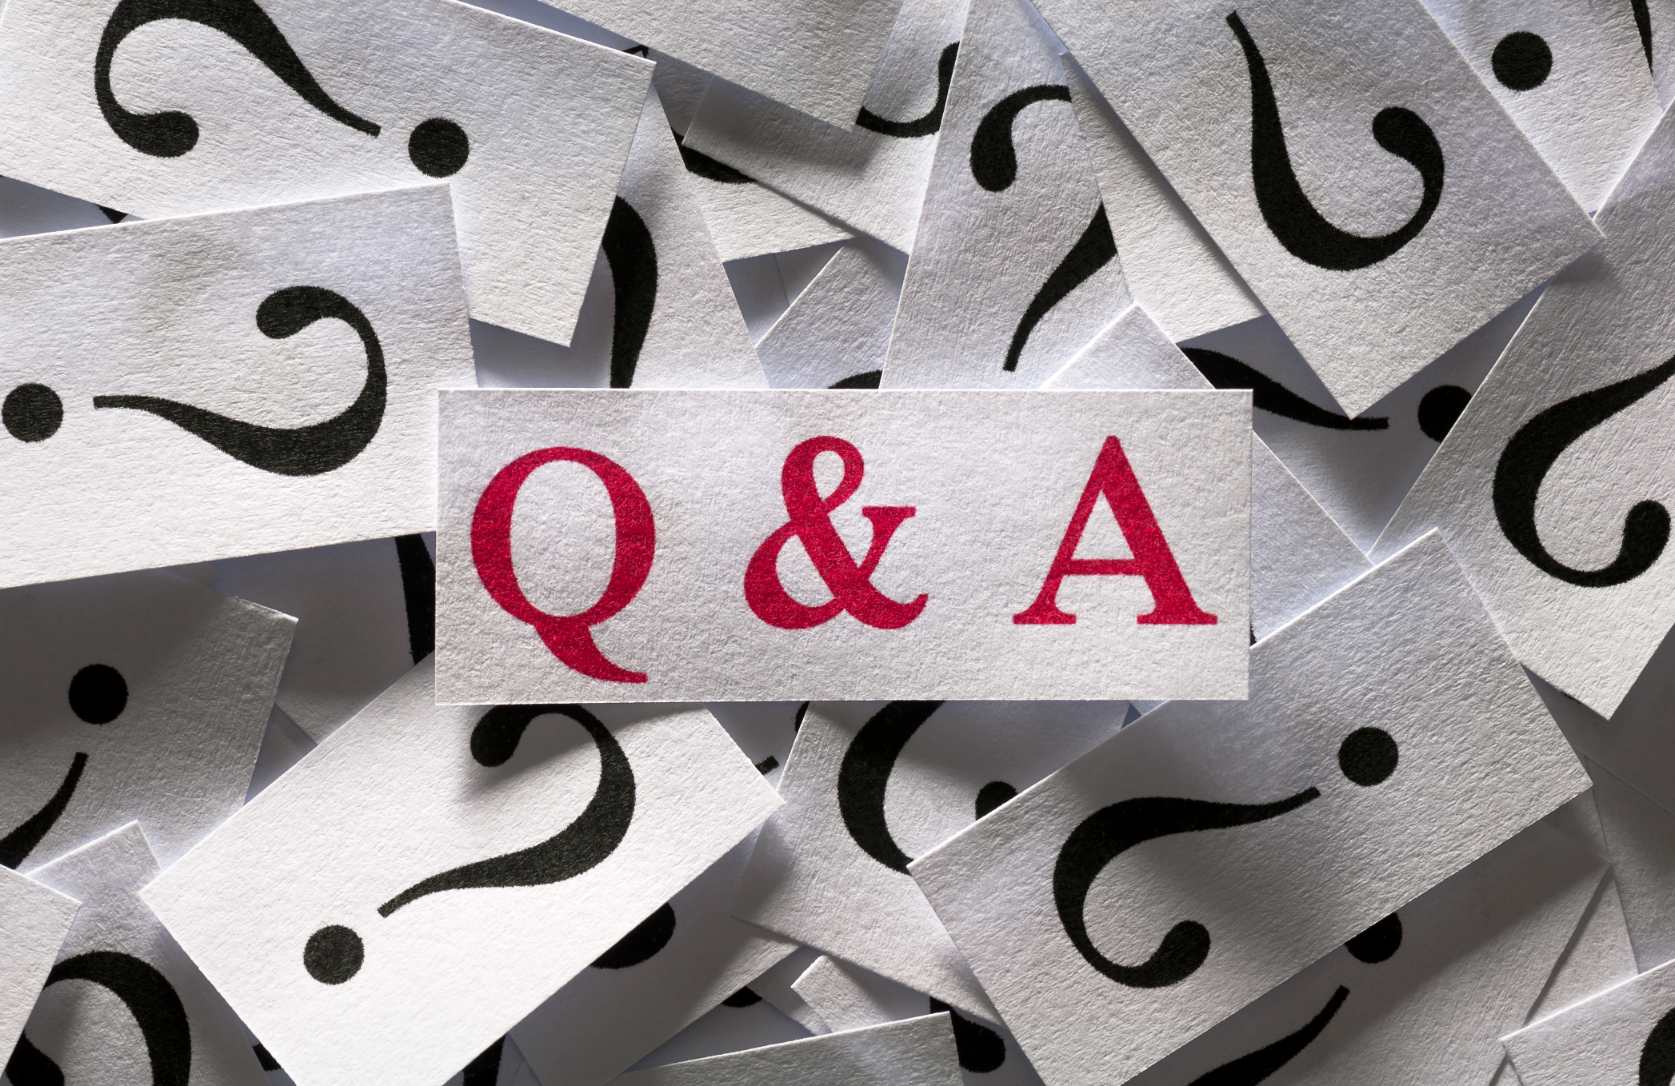 Q&A notecard and question marks graphic